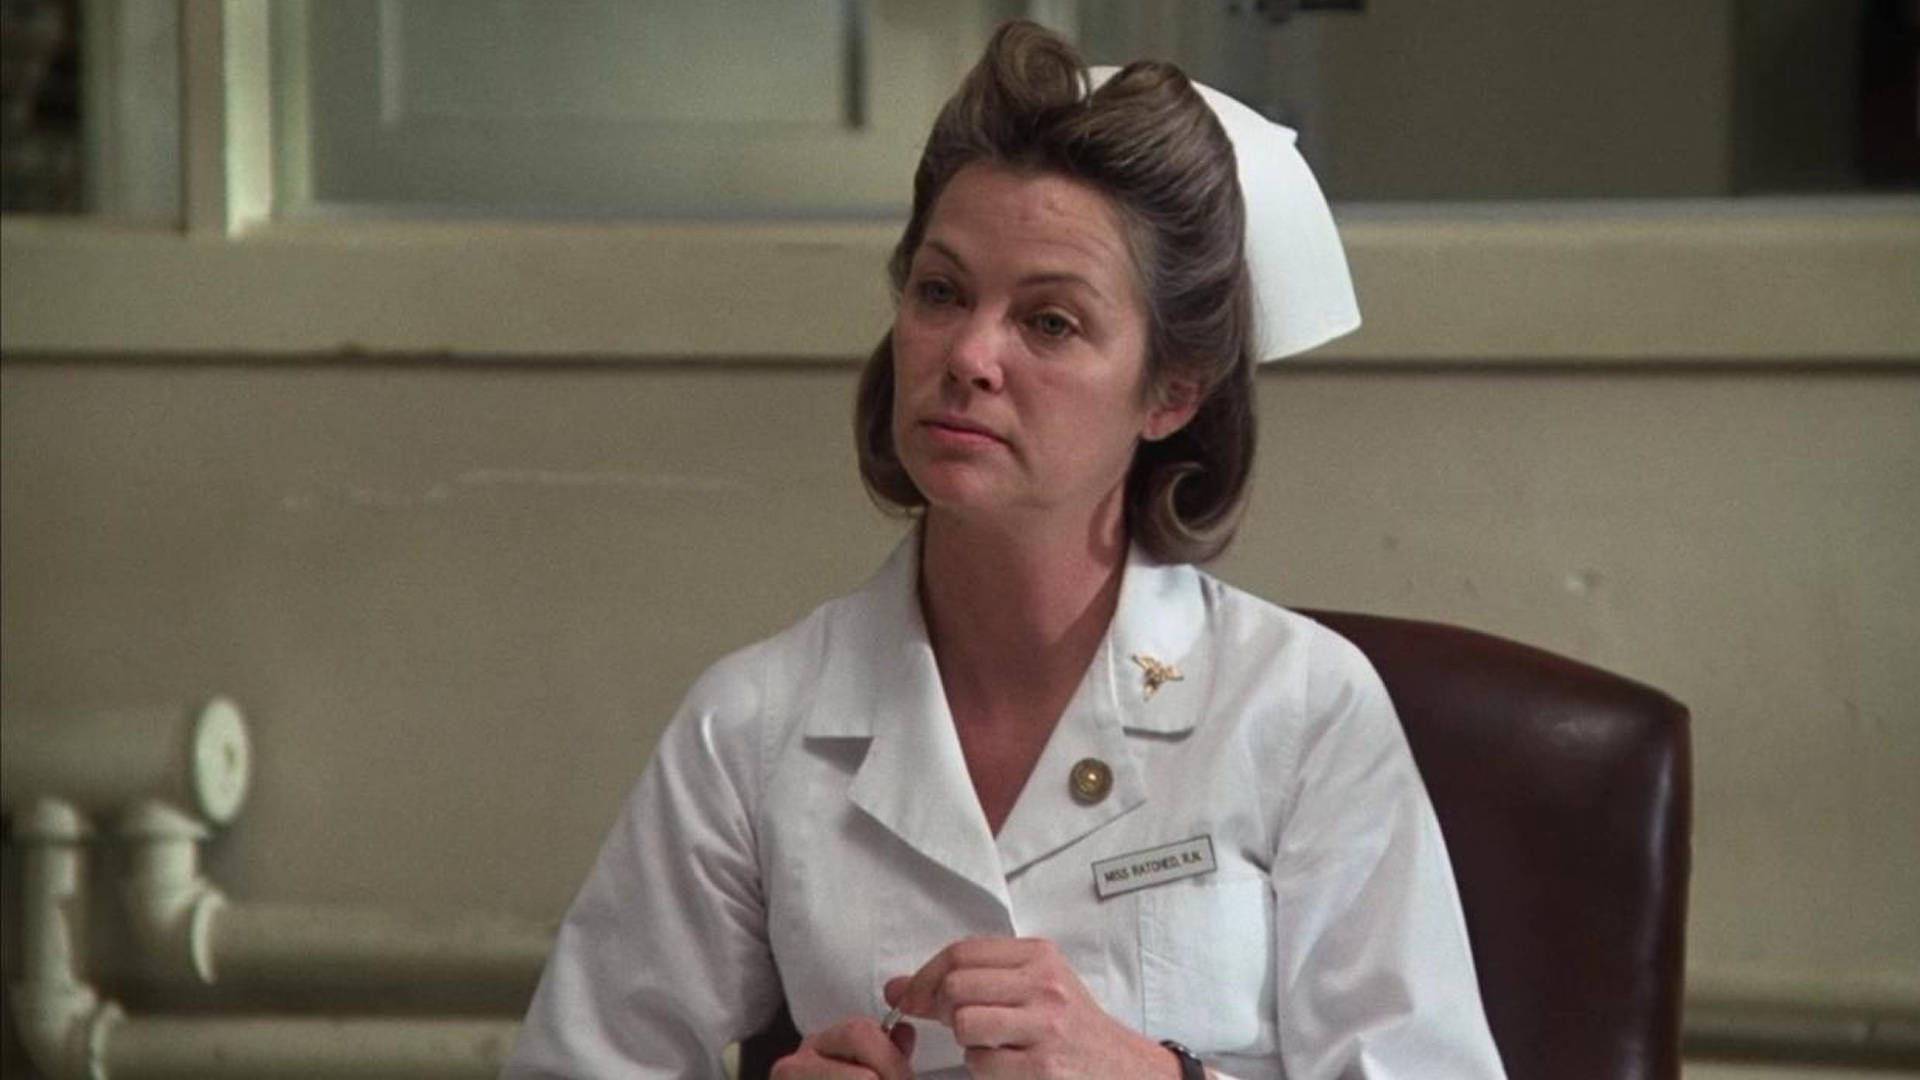 Nurse Ratched in her iconic white uniform Wallpaper